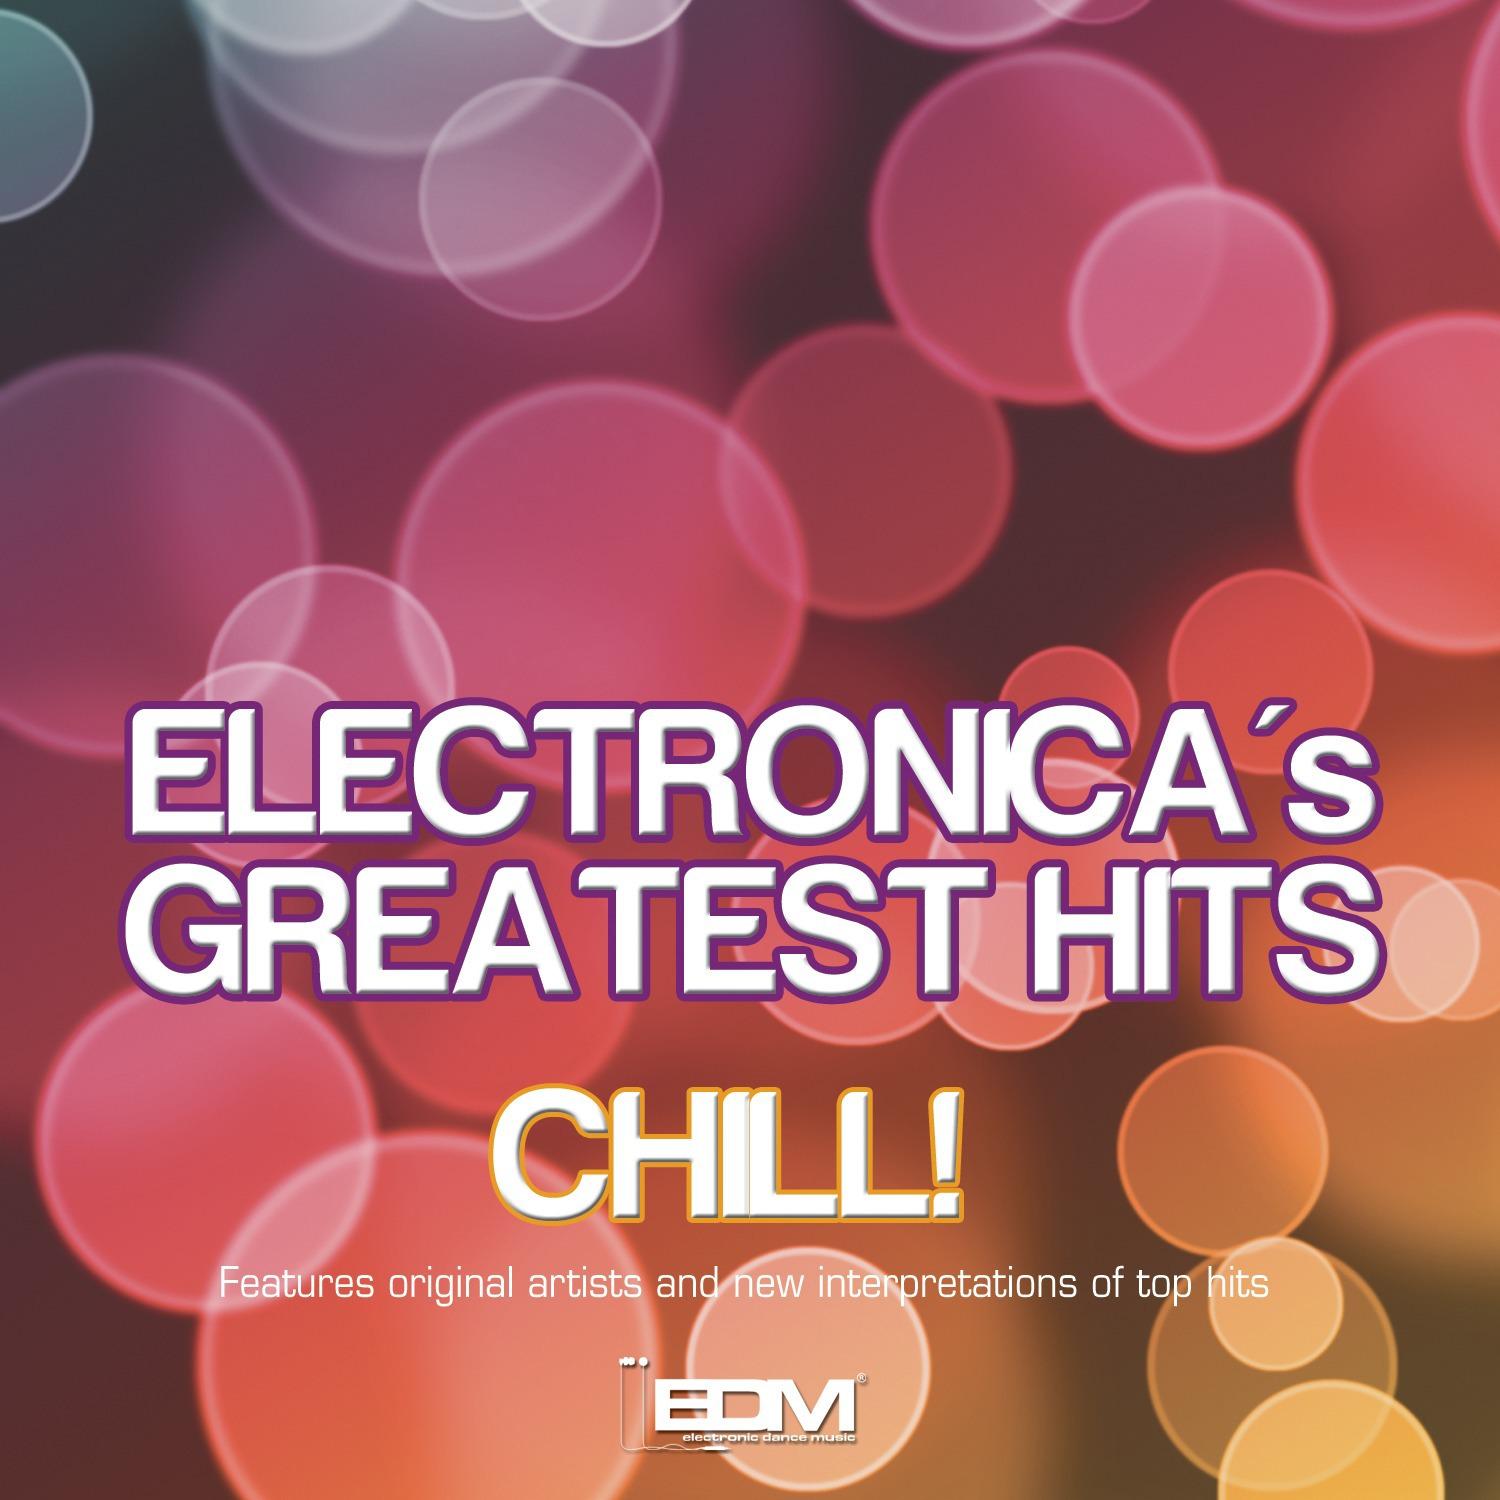 Electronica's Greatest Hits Chill